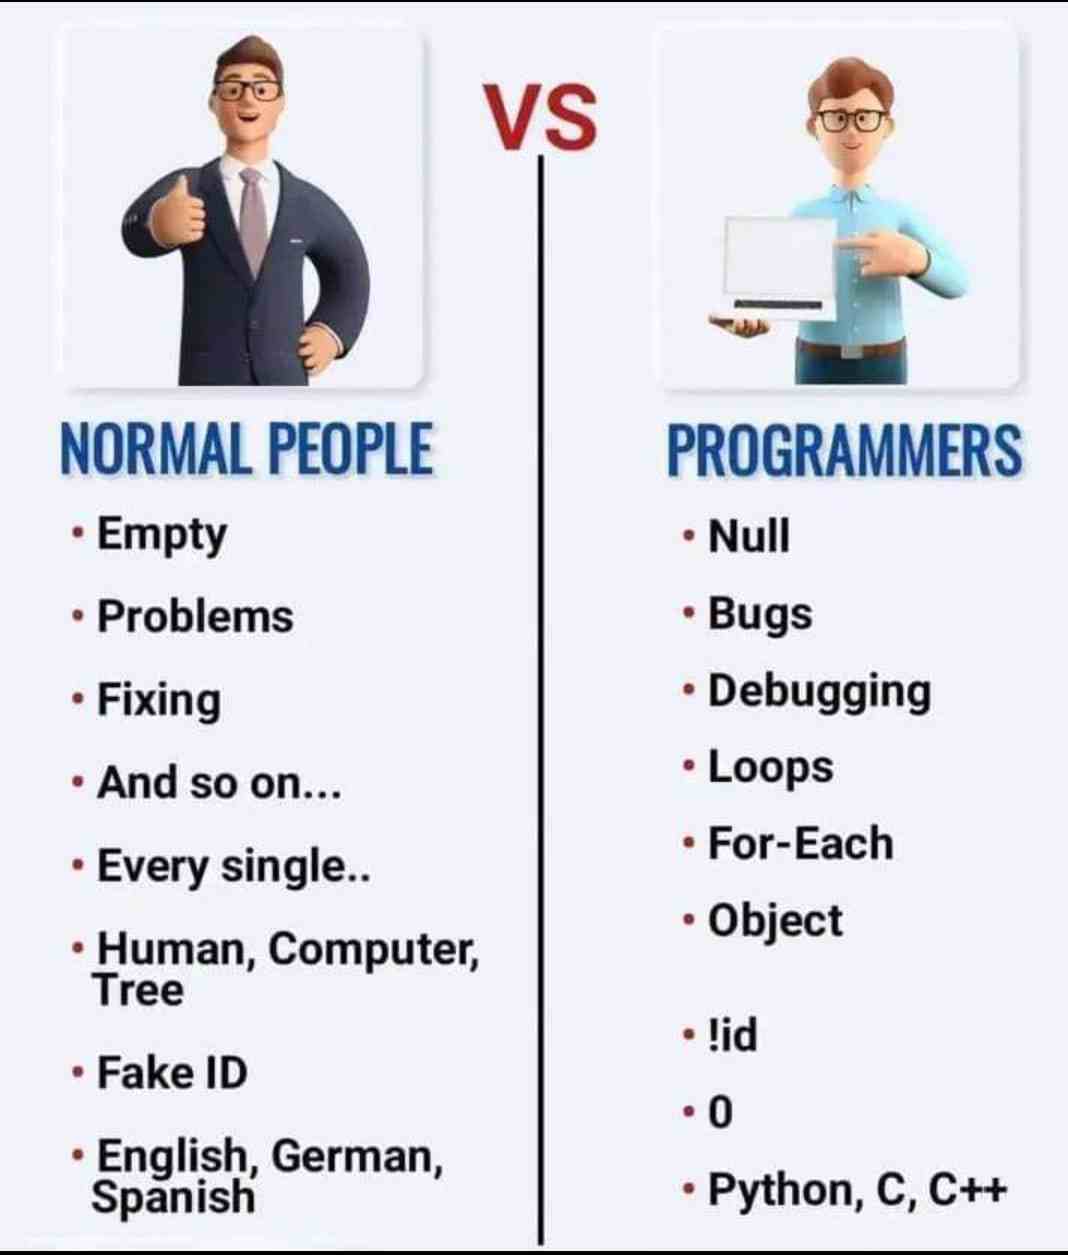 Normal People & Programmerszs